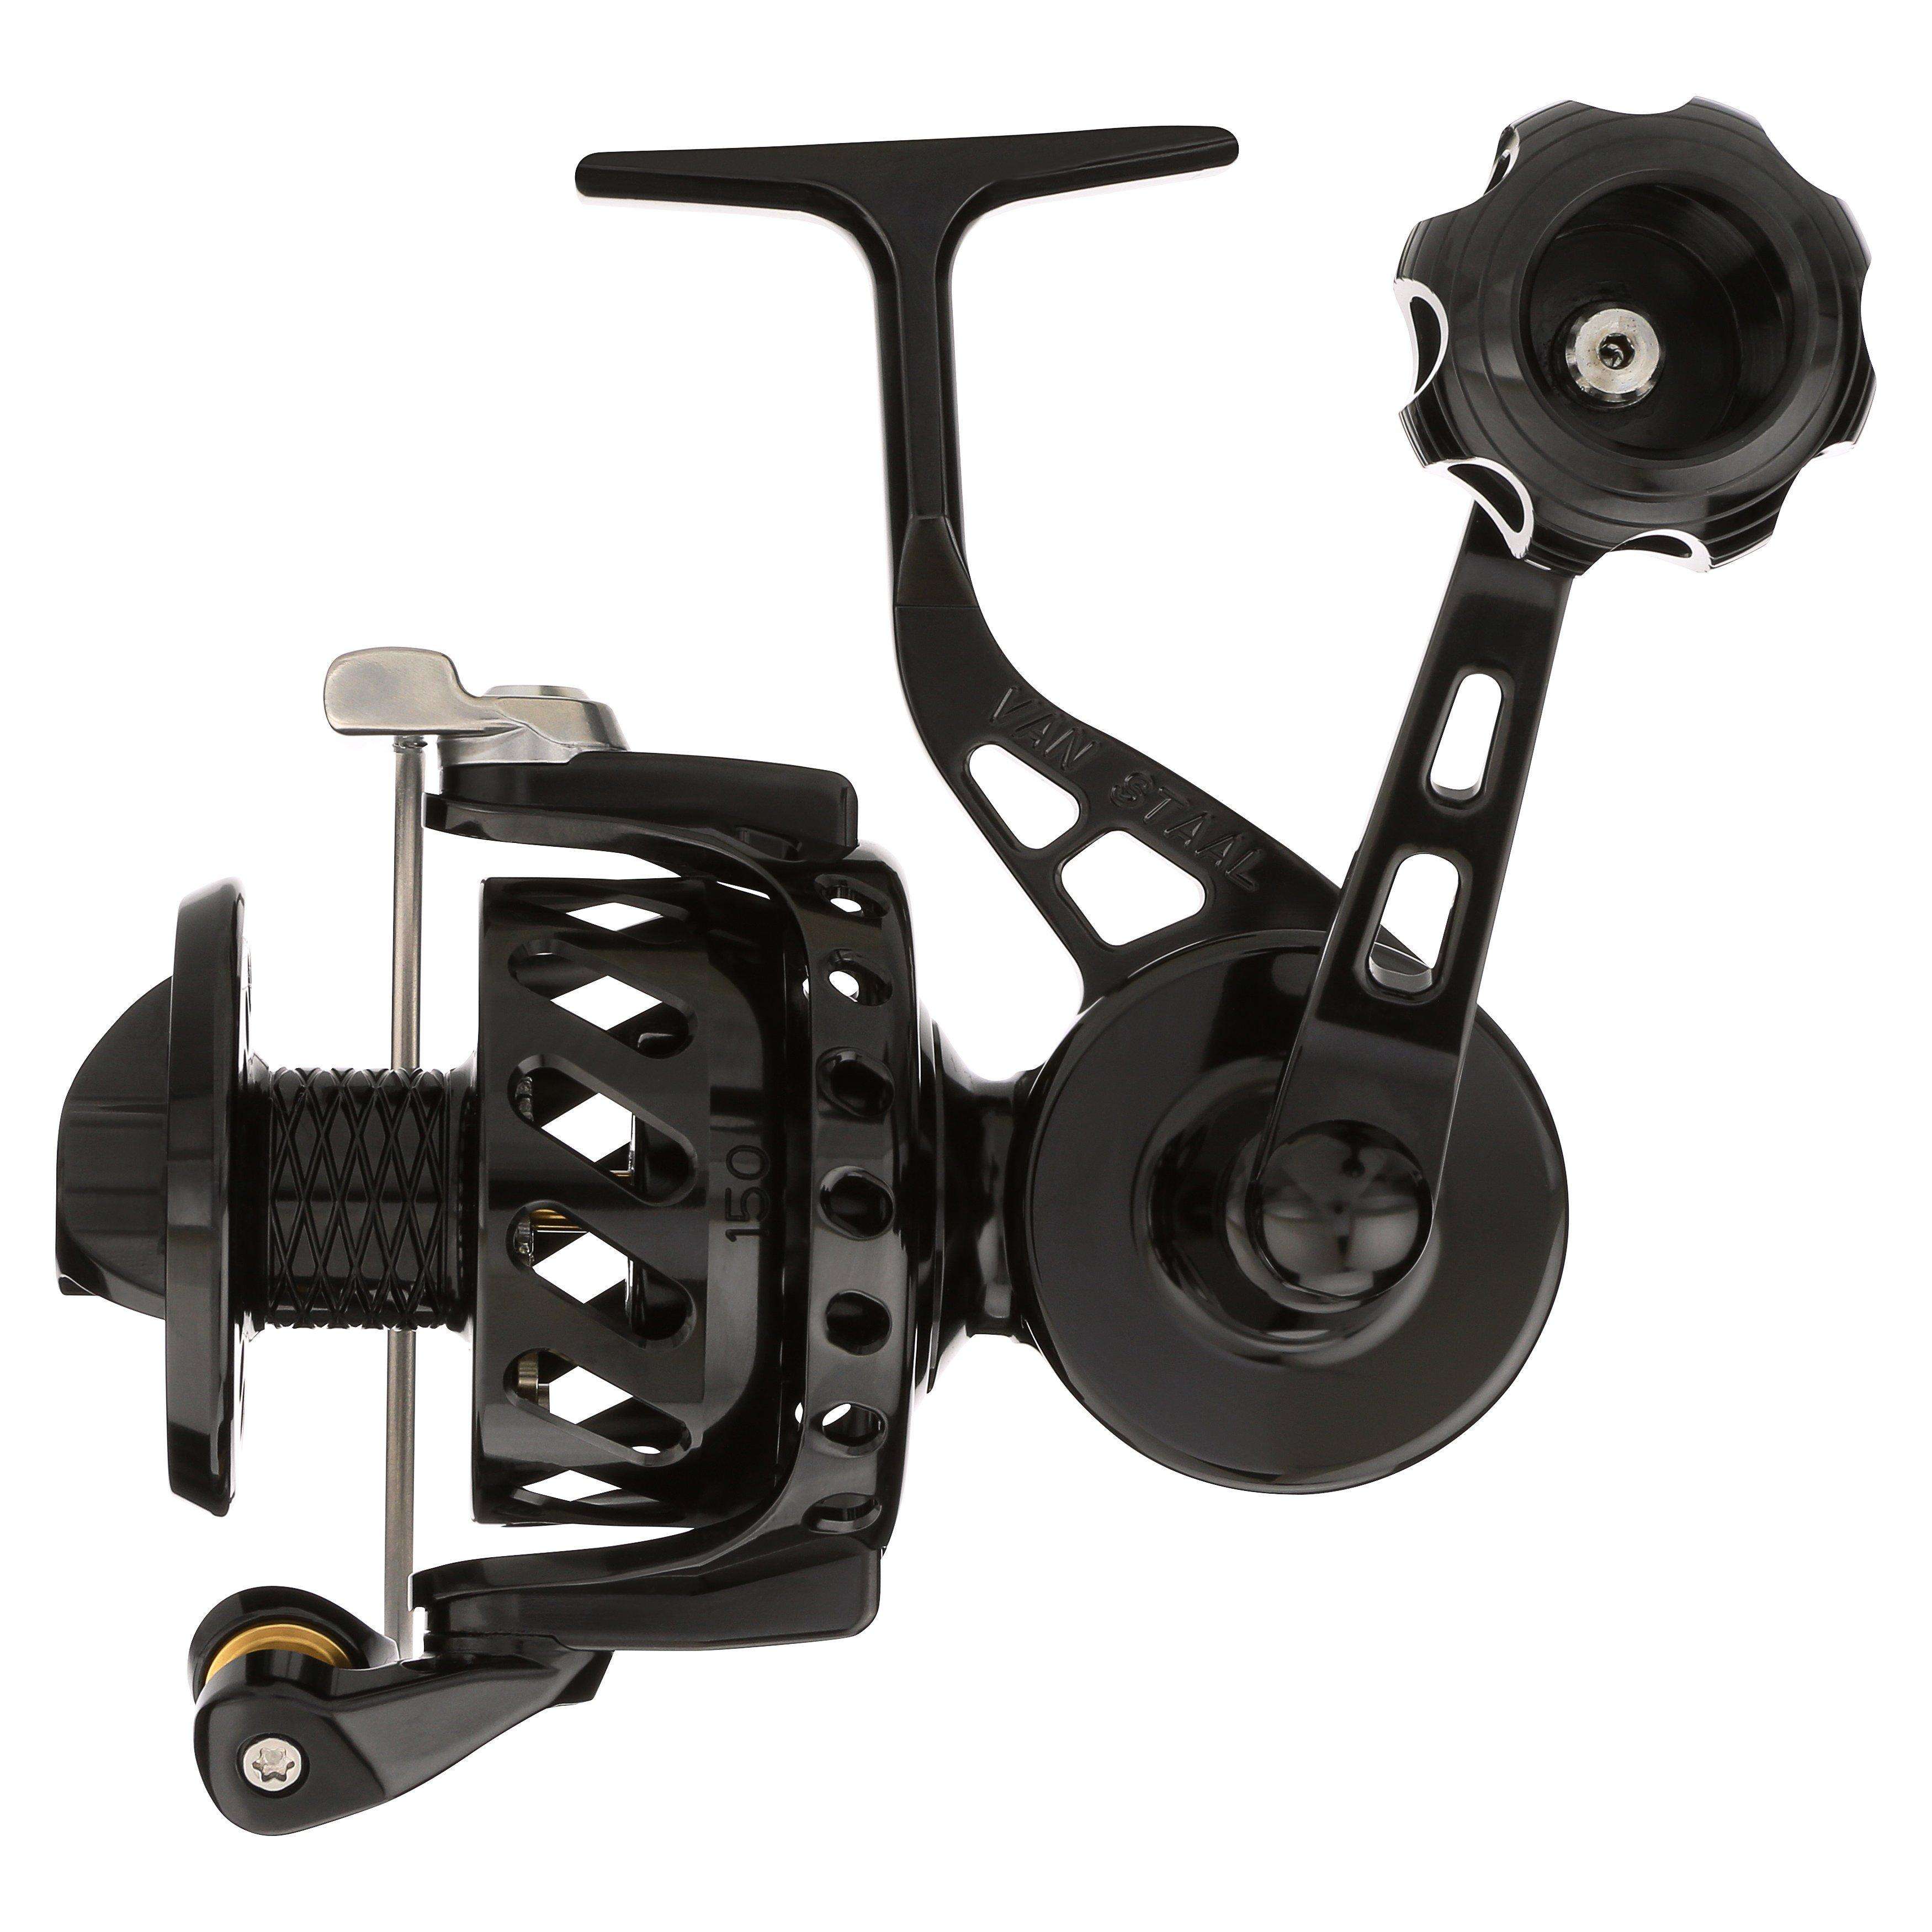 Van Staal VS X2 Bailed Spinning Reels - TackleDirect